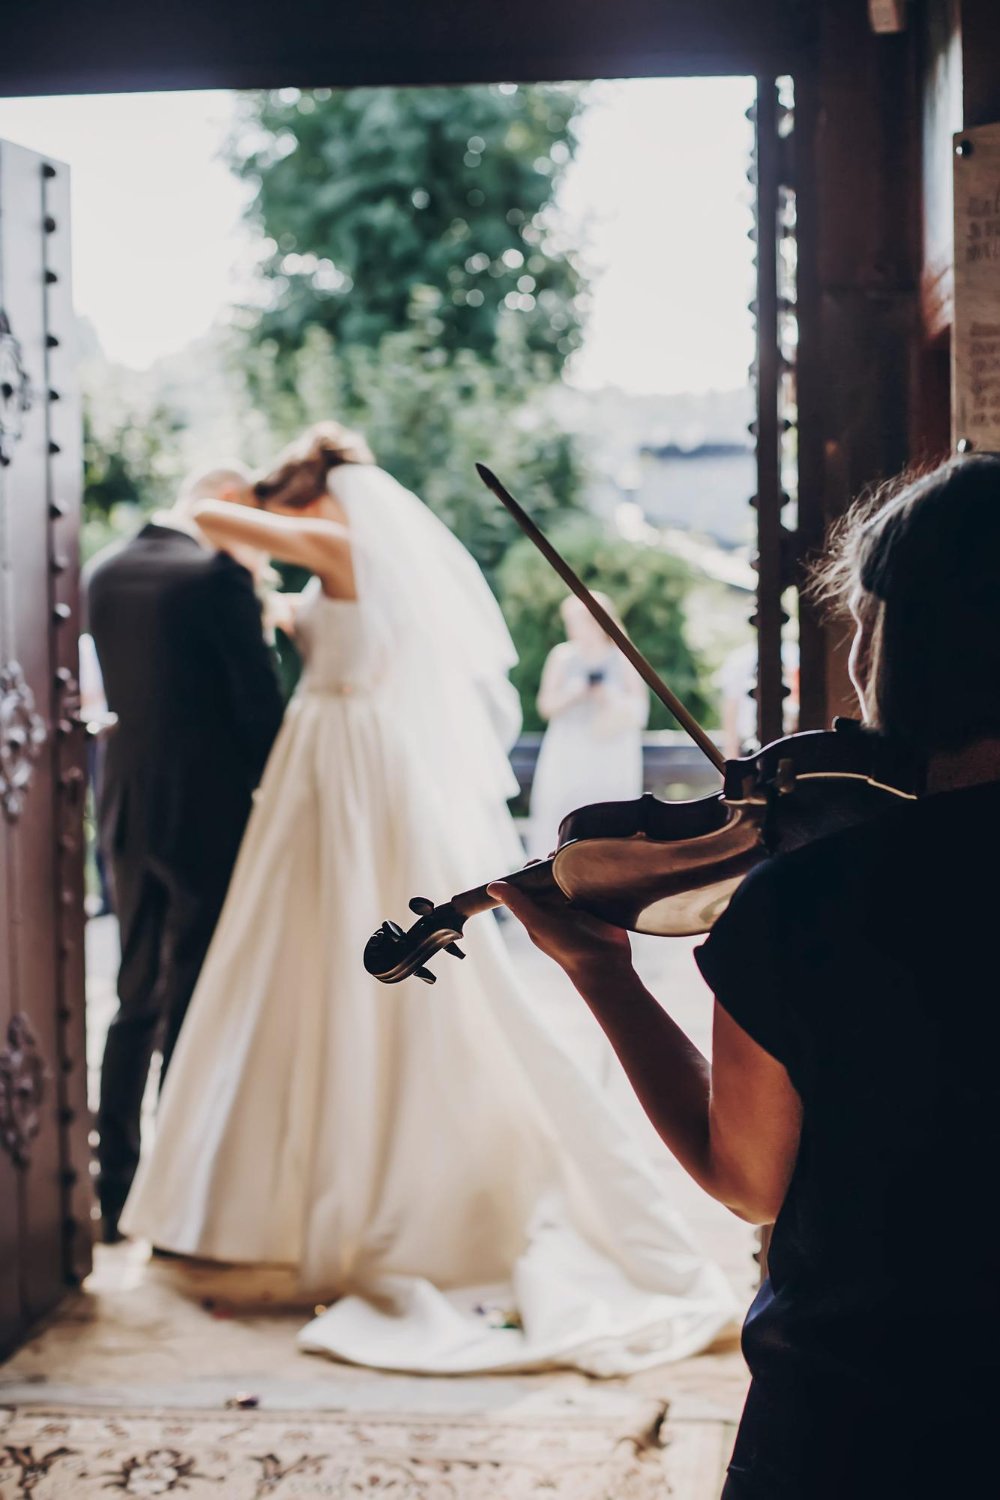 Photo musician playing on violin while beautiful bride and groom